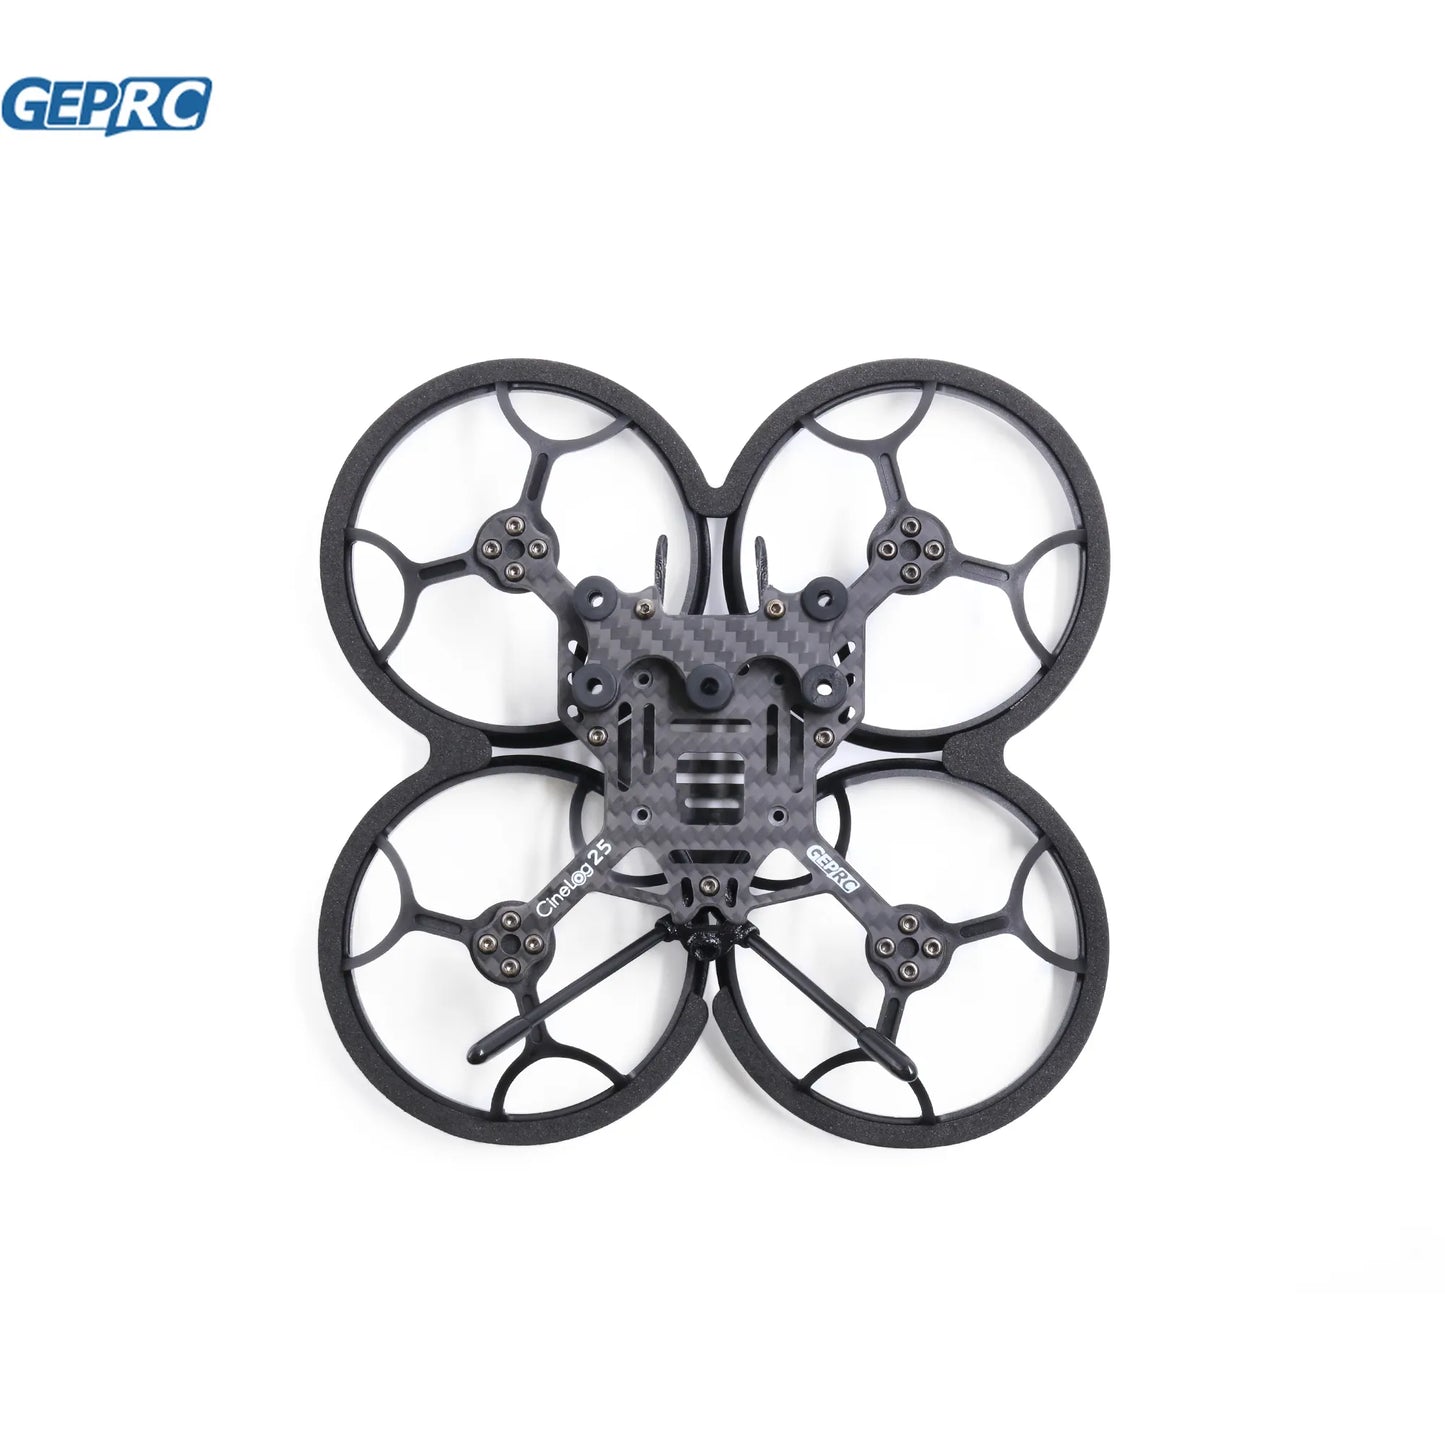 GEPRC GEP-CL25 Frame - Suitable For Cinelog 25 Drone Carbon Fiber Frame Replacement Accessories RC FPV Freestyle Quadcopter Drone